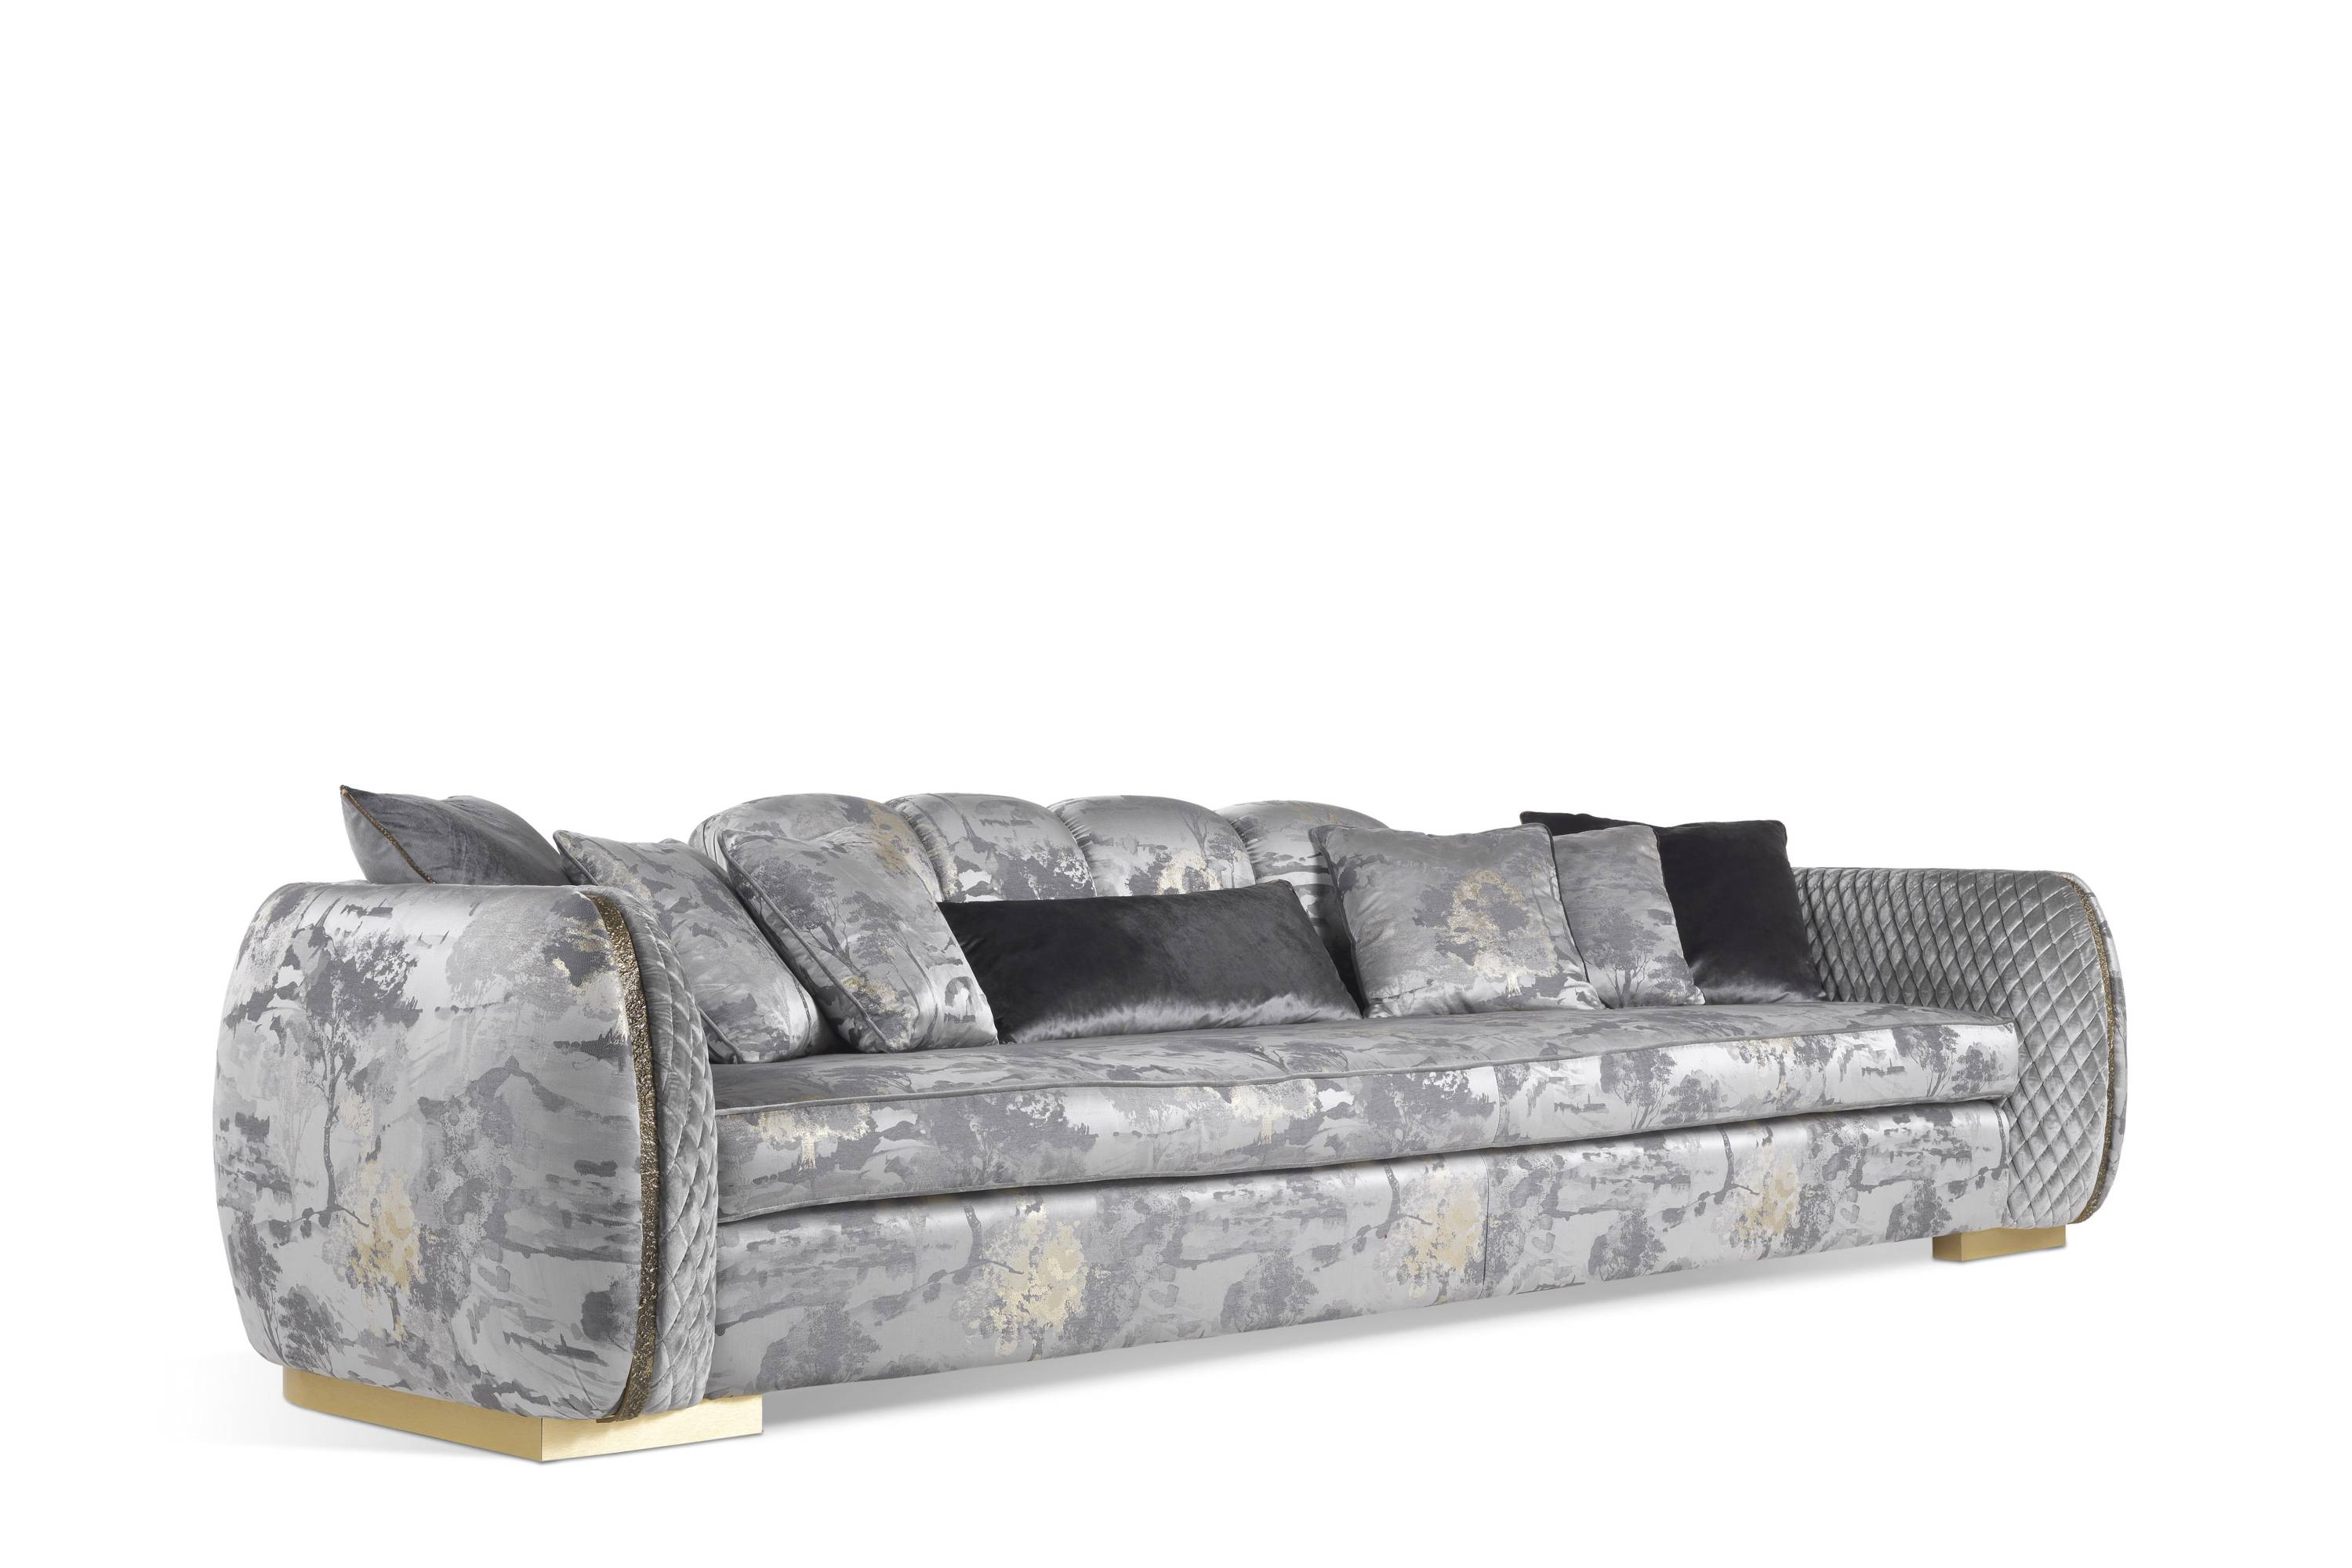 ARKÈ 2-seater sofa - 3-seater sofa - Bespoke projects with luxury Made in Italy classic furniture